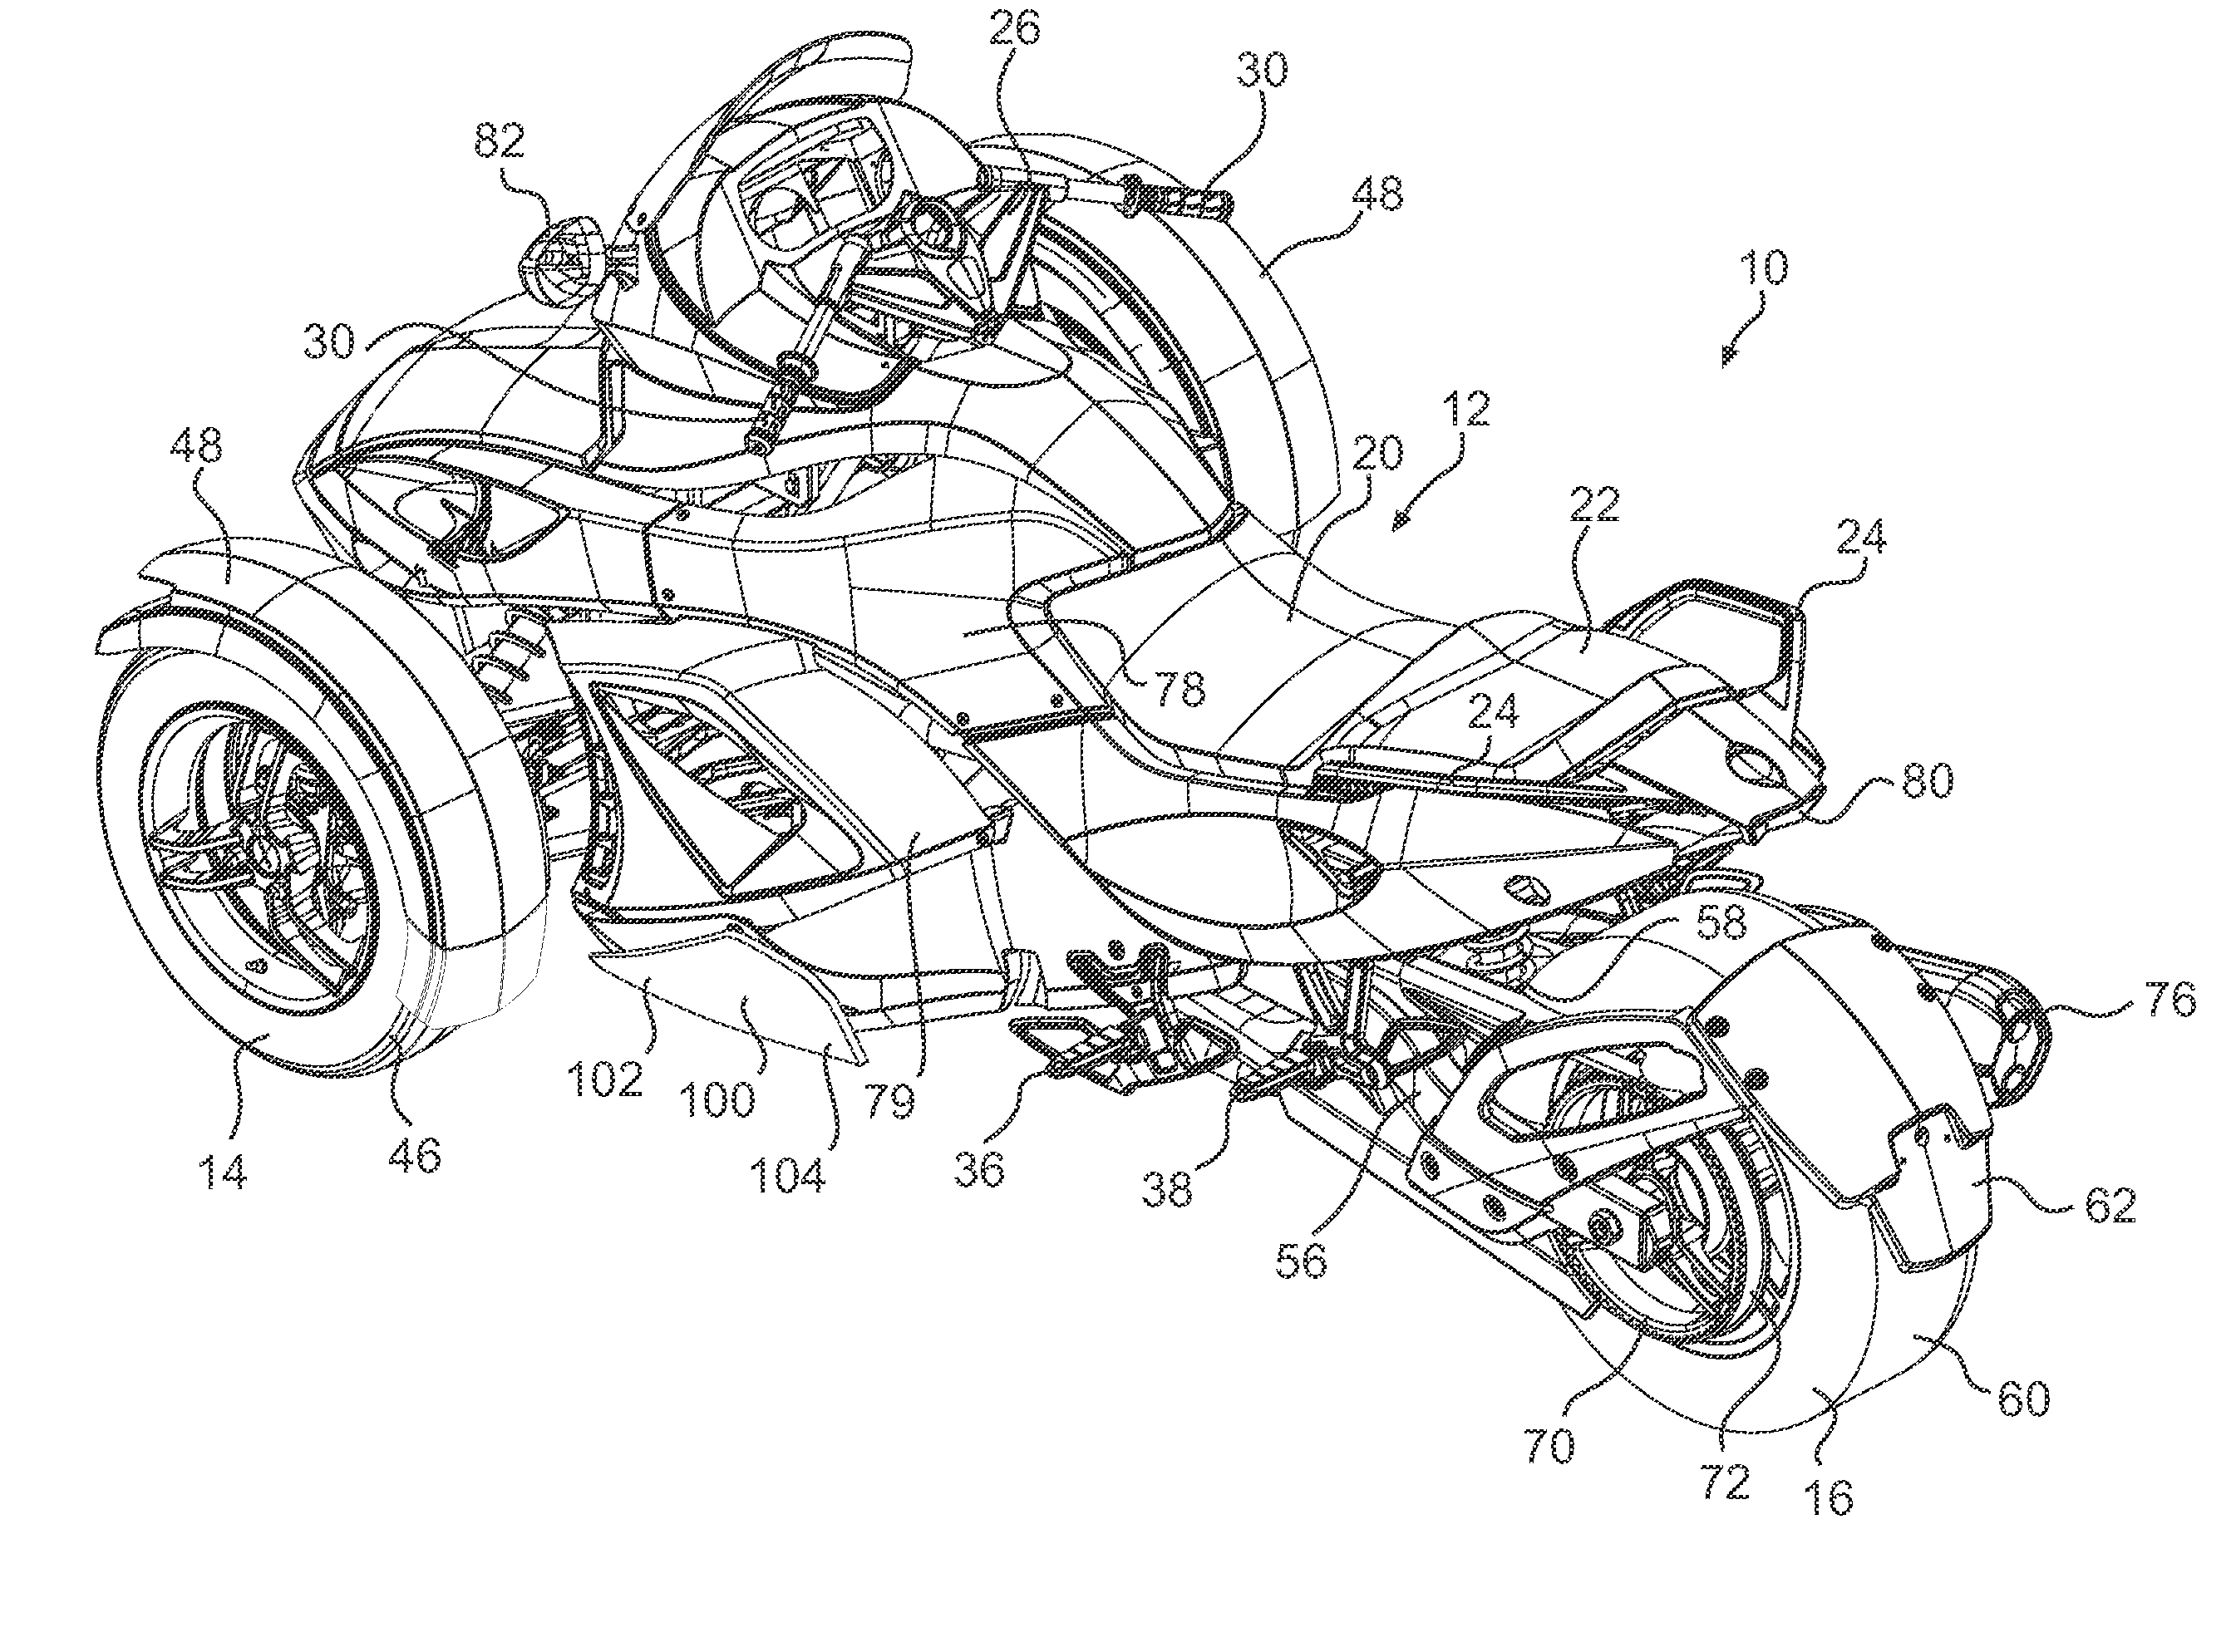 Wheeled vehicle with water deflectors